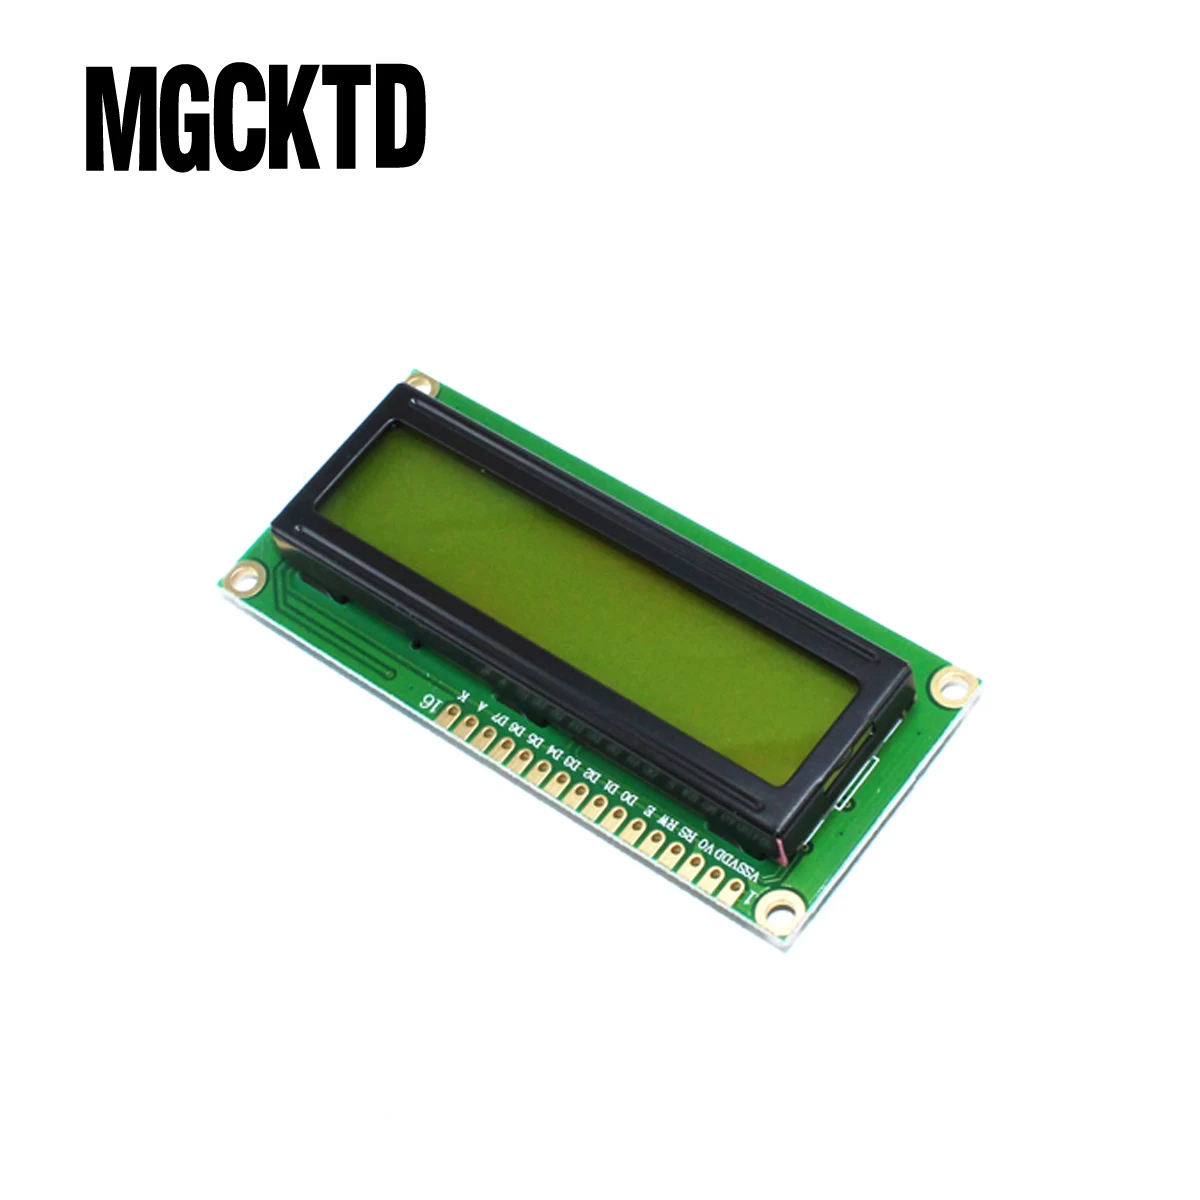 Lcm com Verde Lote 1602 Lcd Character Display Module Amarelo 5 16*2 Pçs –